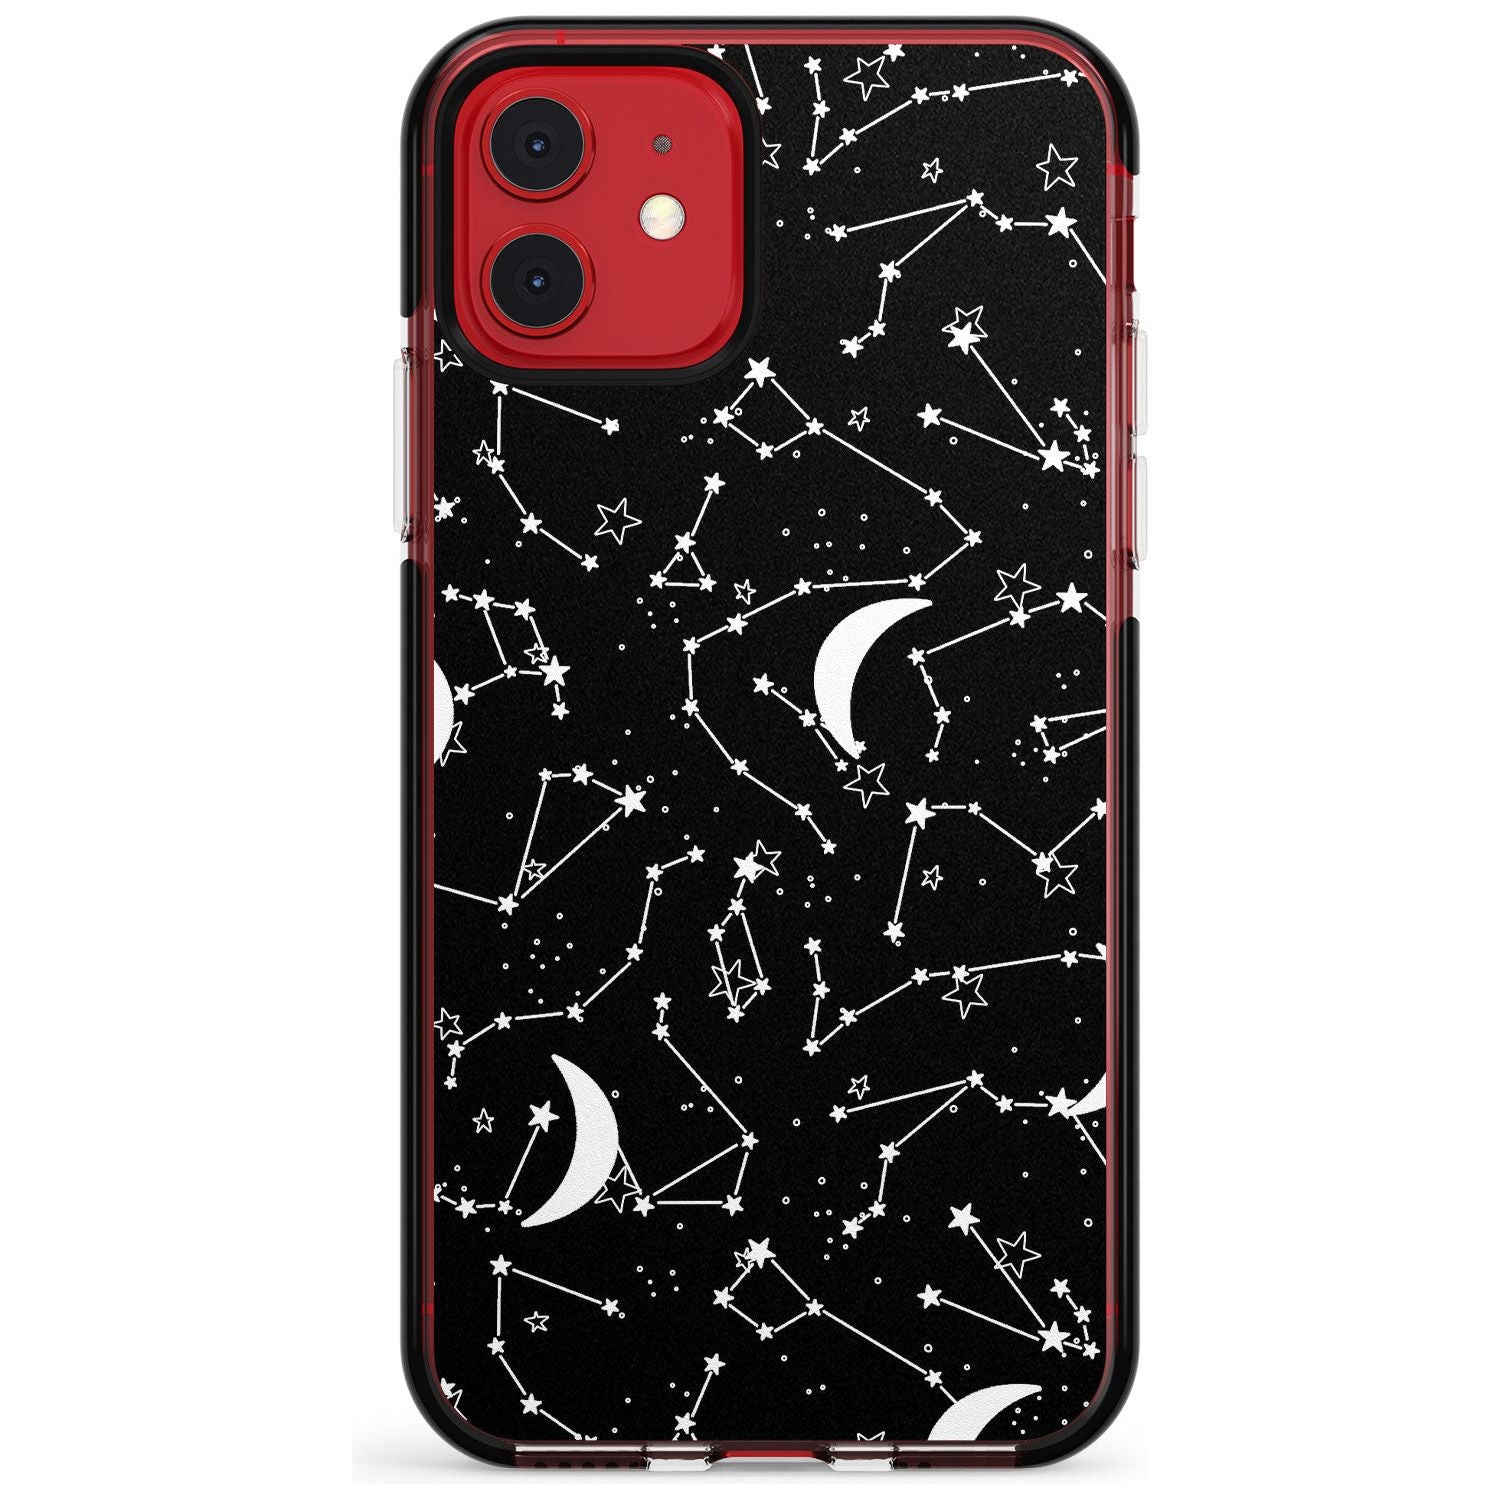 White Constellations on Black Pink Fade Impact Phone Case for iPhone 11 Pro Max